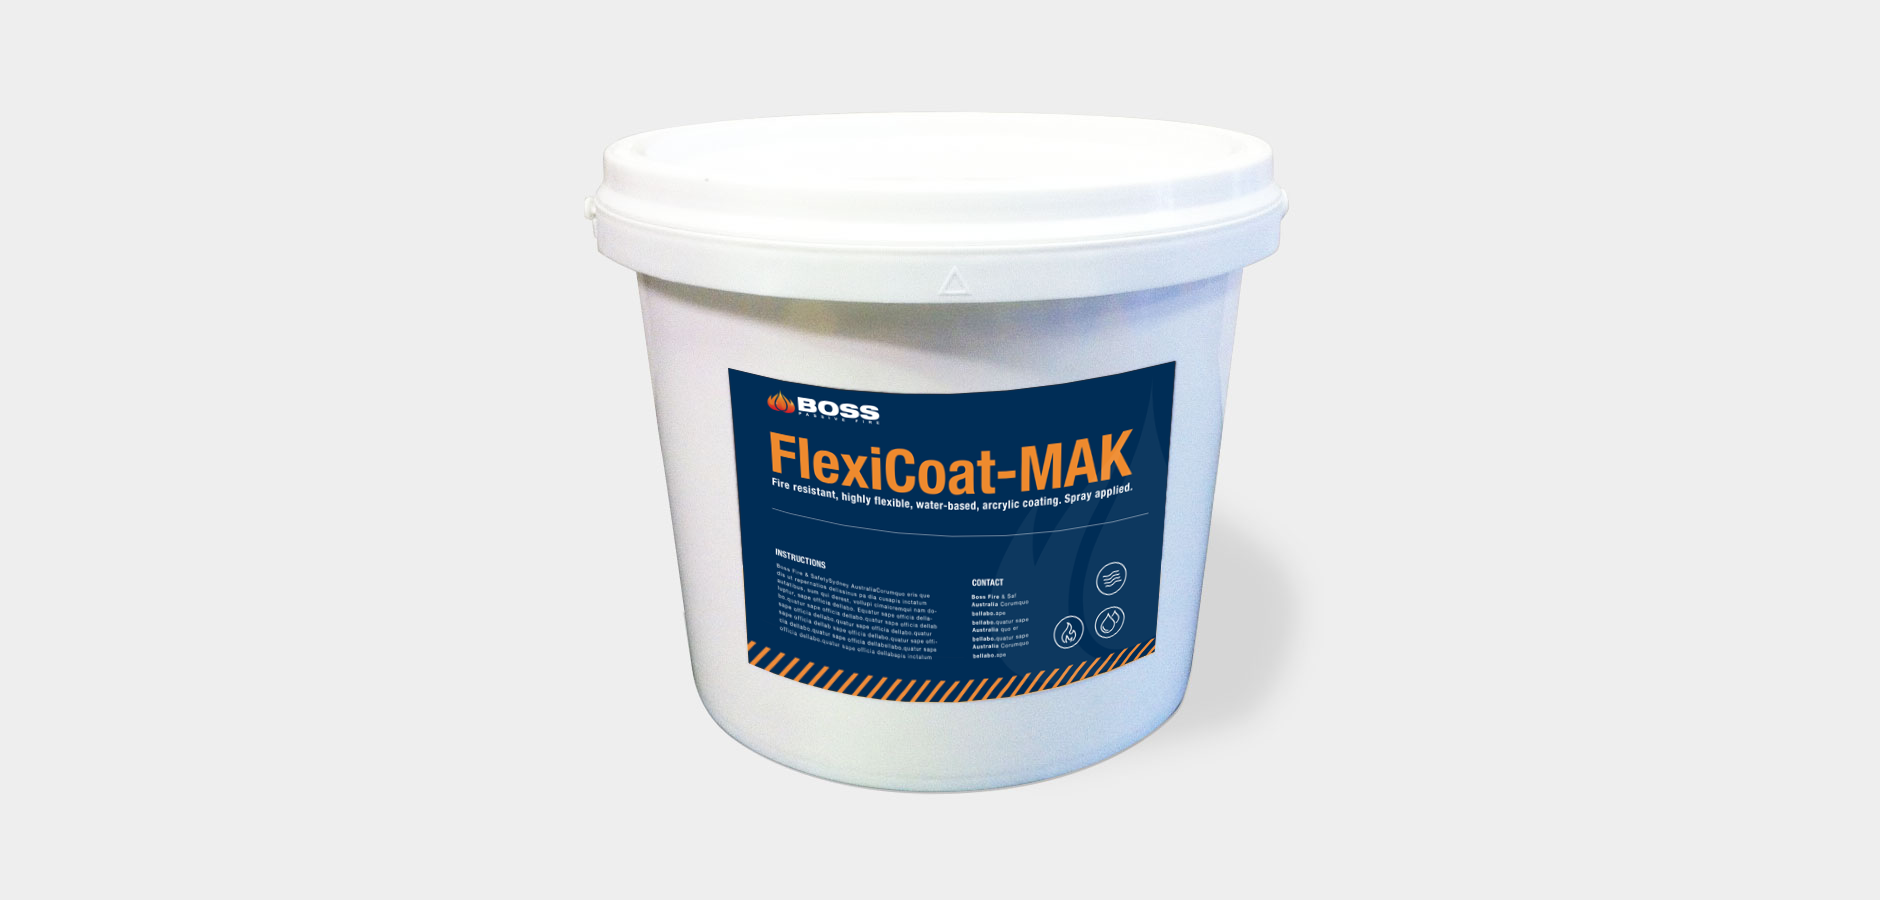 FlexiCoat-MAK comes in an easy-to-use 5L pail